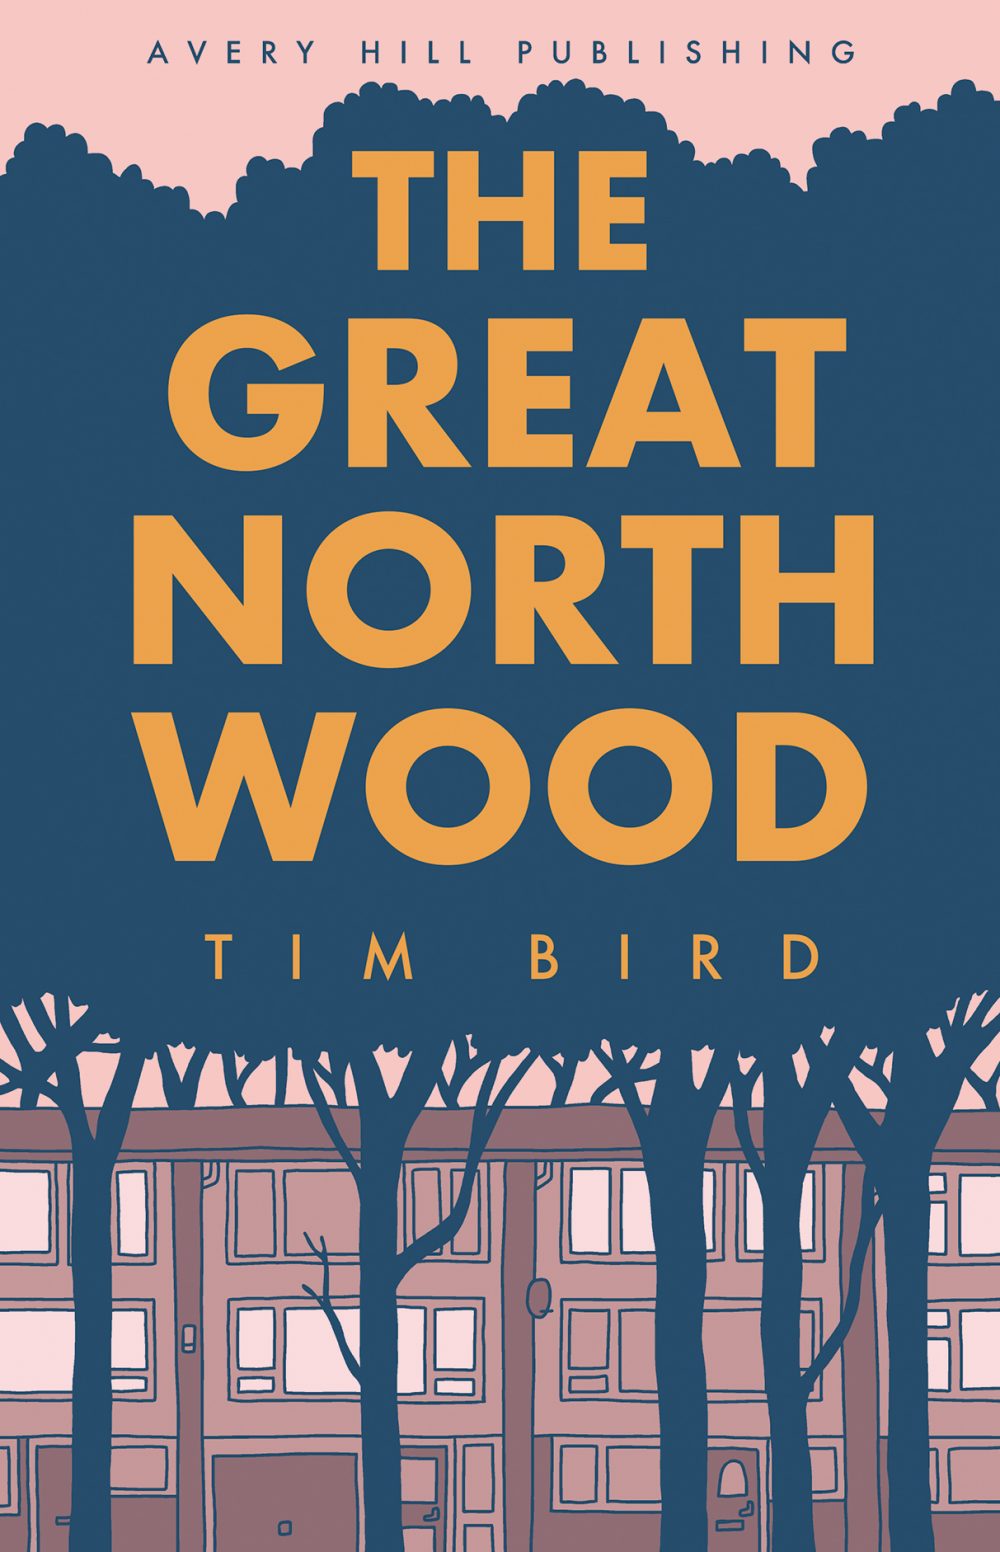 The Great North Wood by Tim Bird (Avery Hill Publishing)